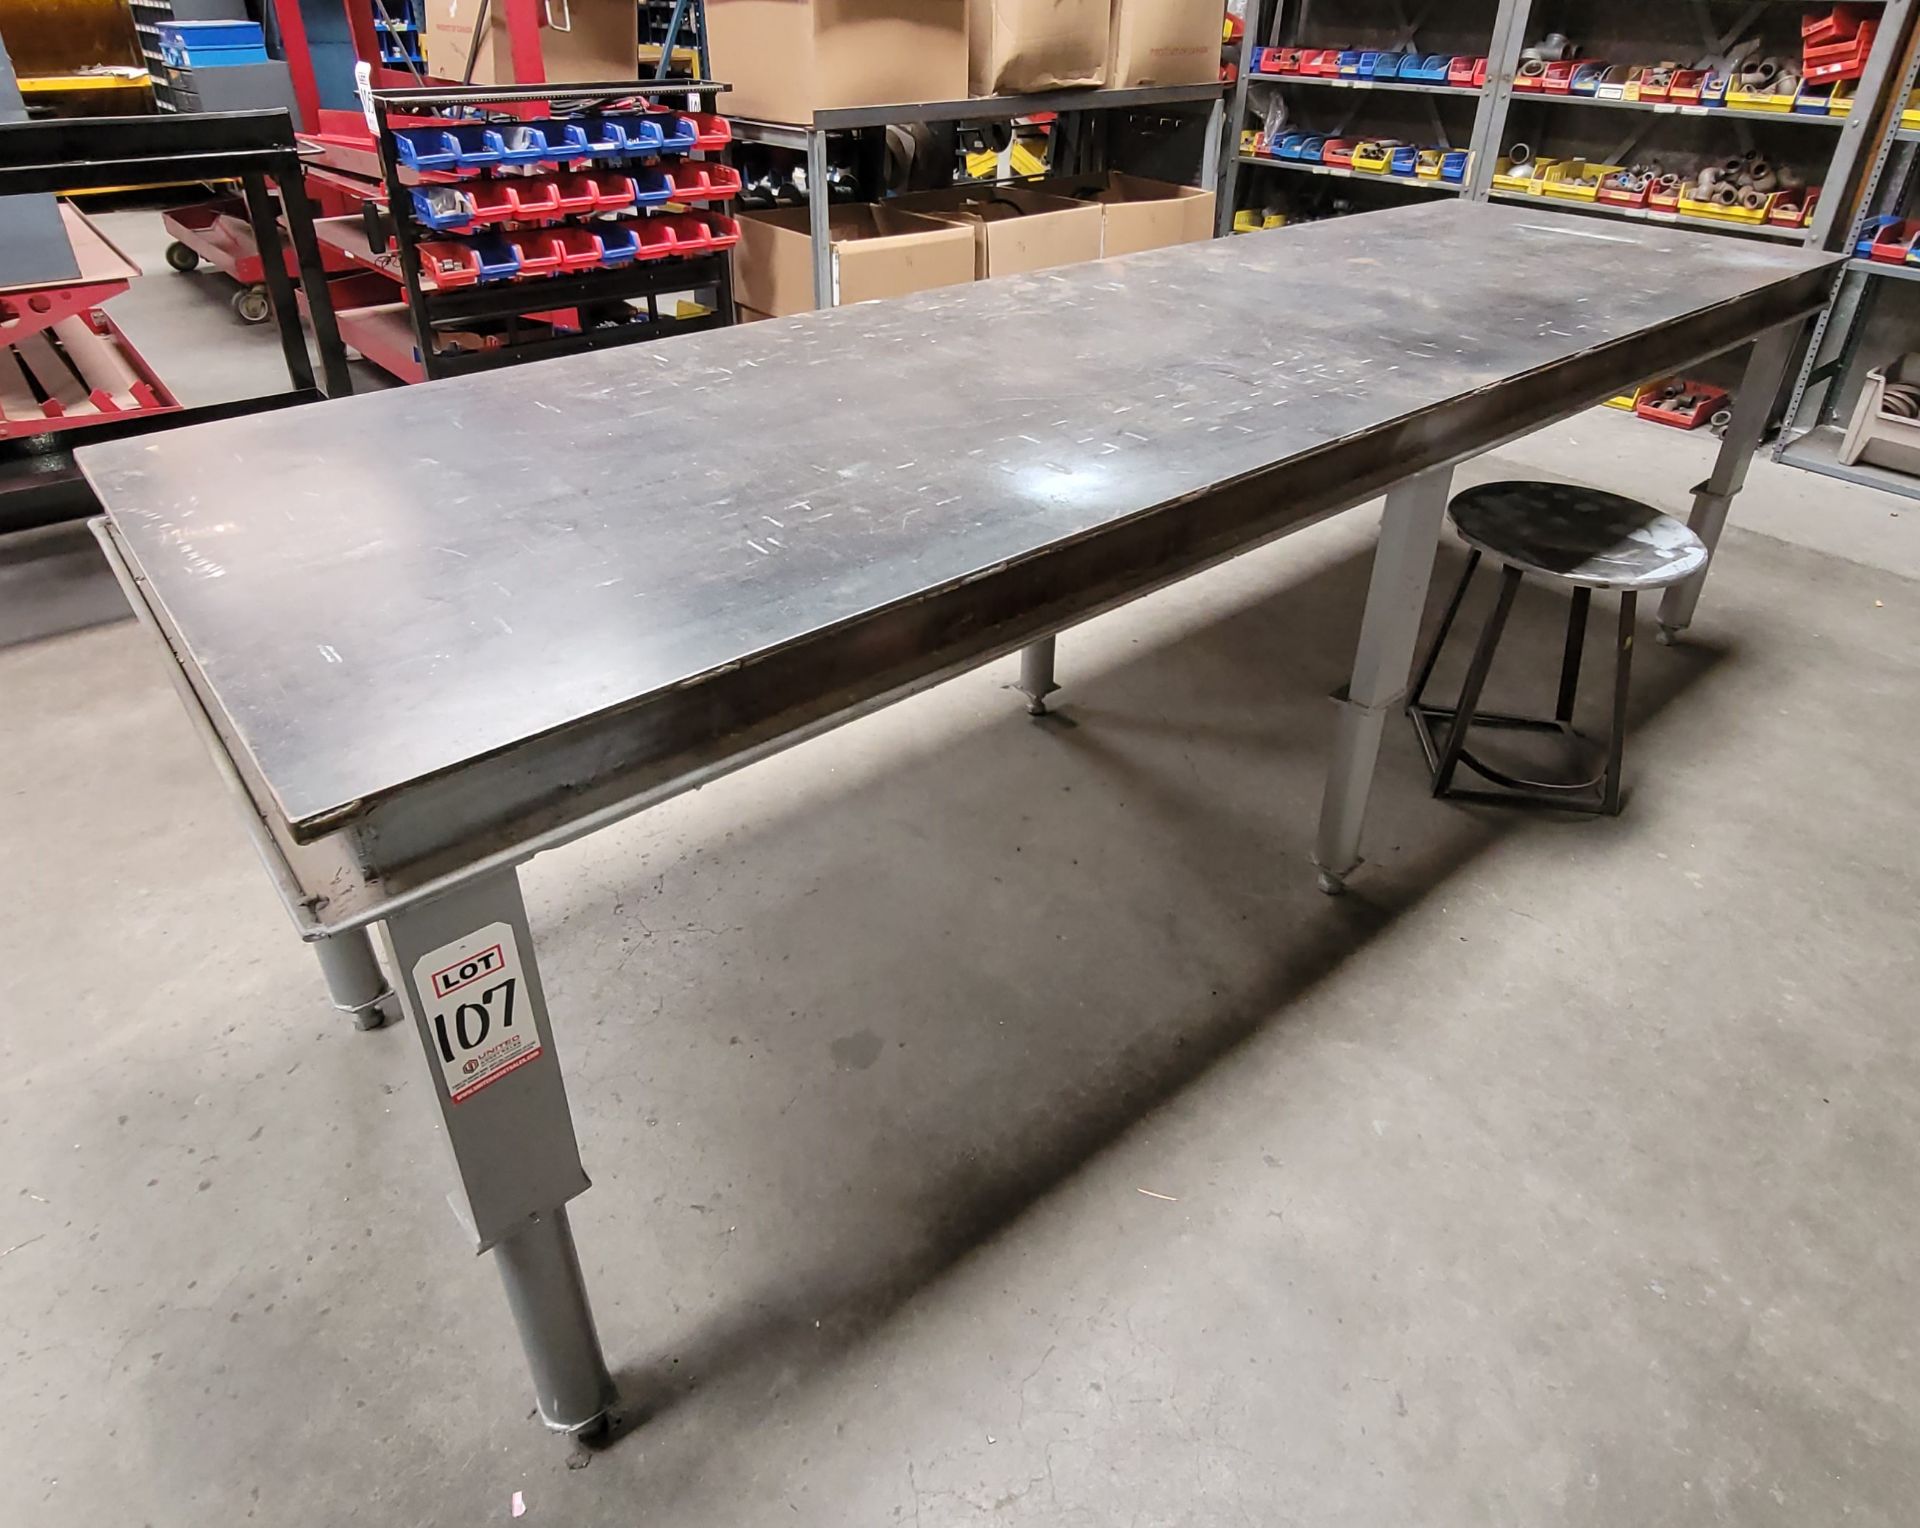 WELDING TABLE W/ 10' X 3' X 1/4" THICK TOP, 37" WORK HEIGHT, (6) HEIGHT ADJUSTABLE LEGS, W/ STEEL